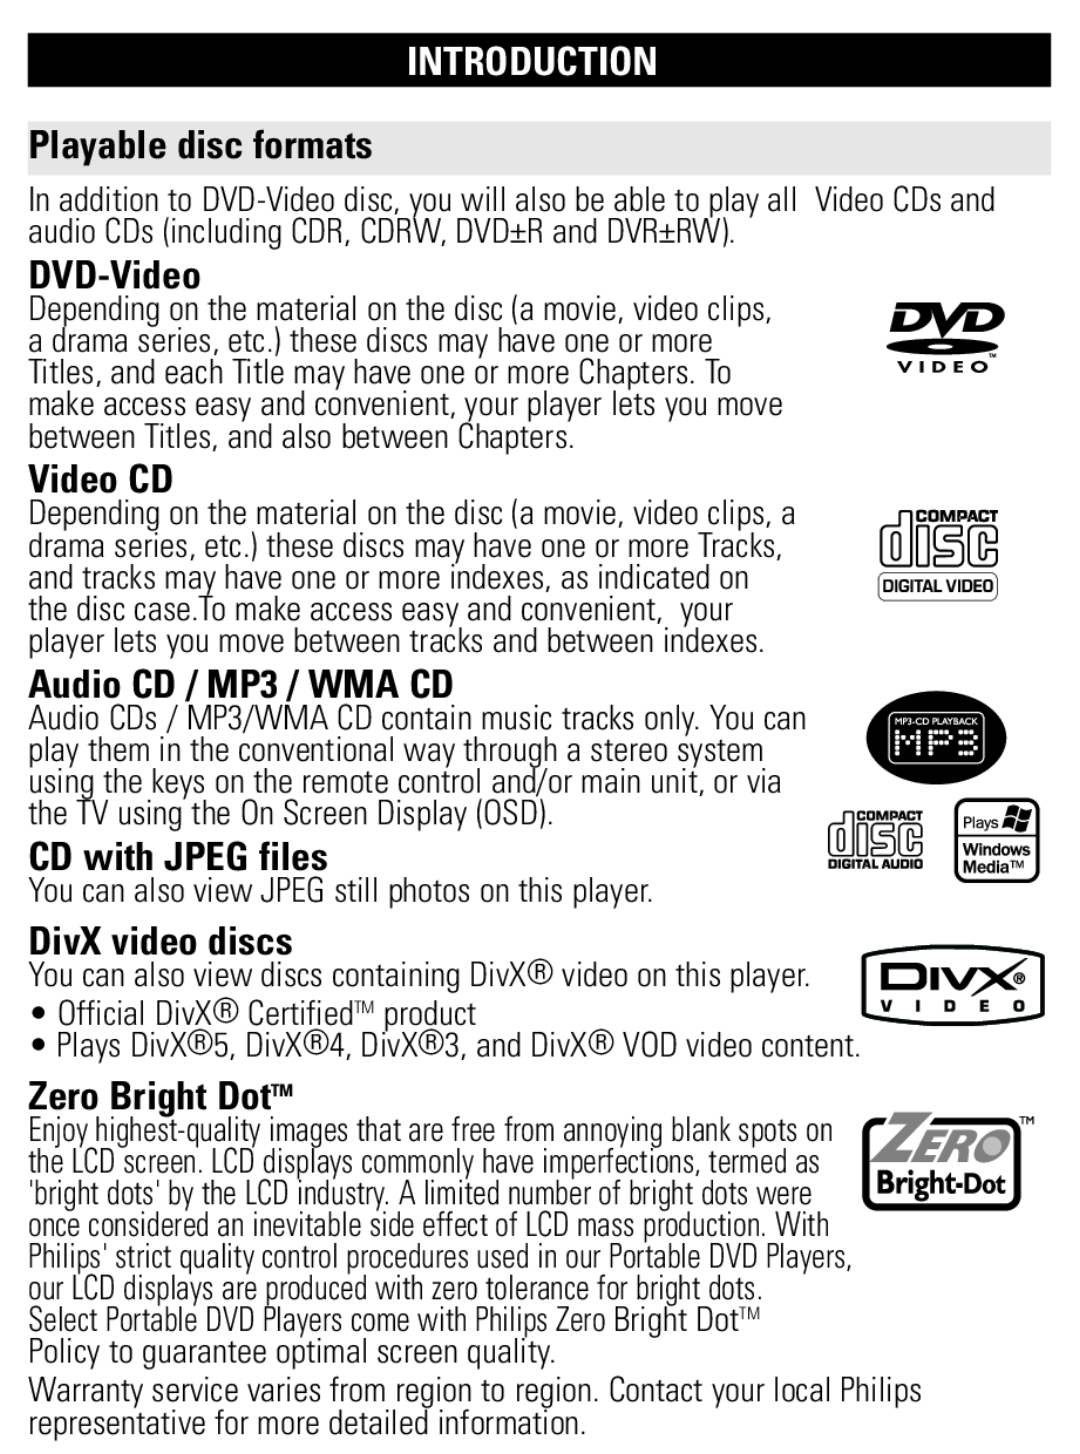 Philips PET1002 Playable disc formats, DVD-Video, Video CD, Audio CD / MP3 / WMA CD, CD with JPEG files, DivX video discs 